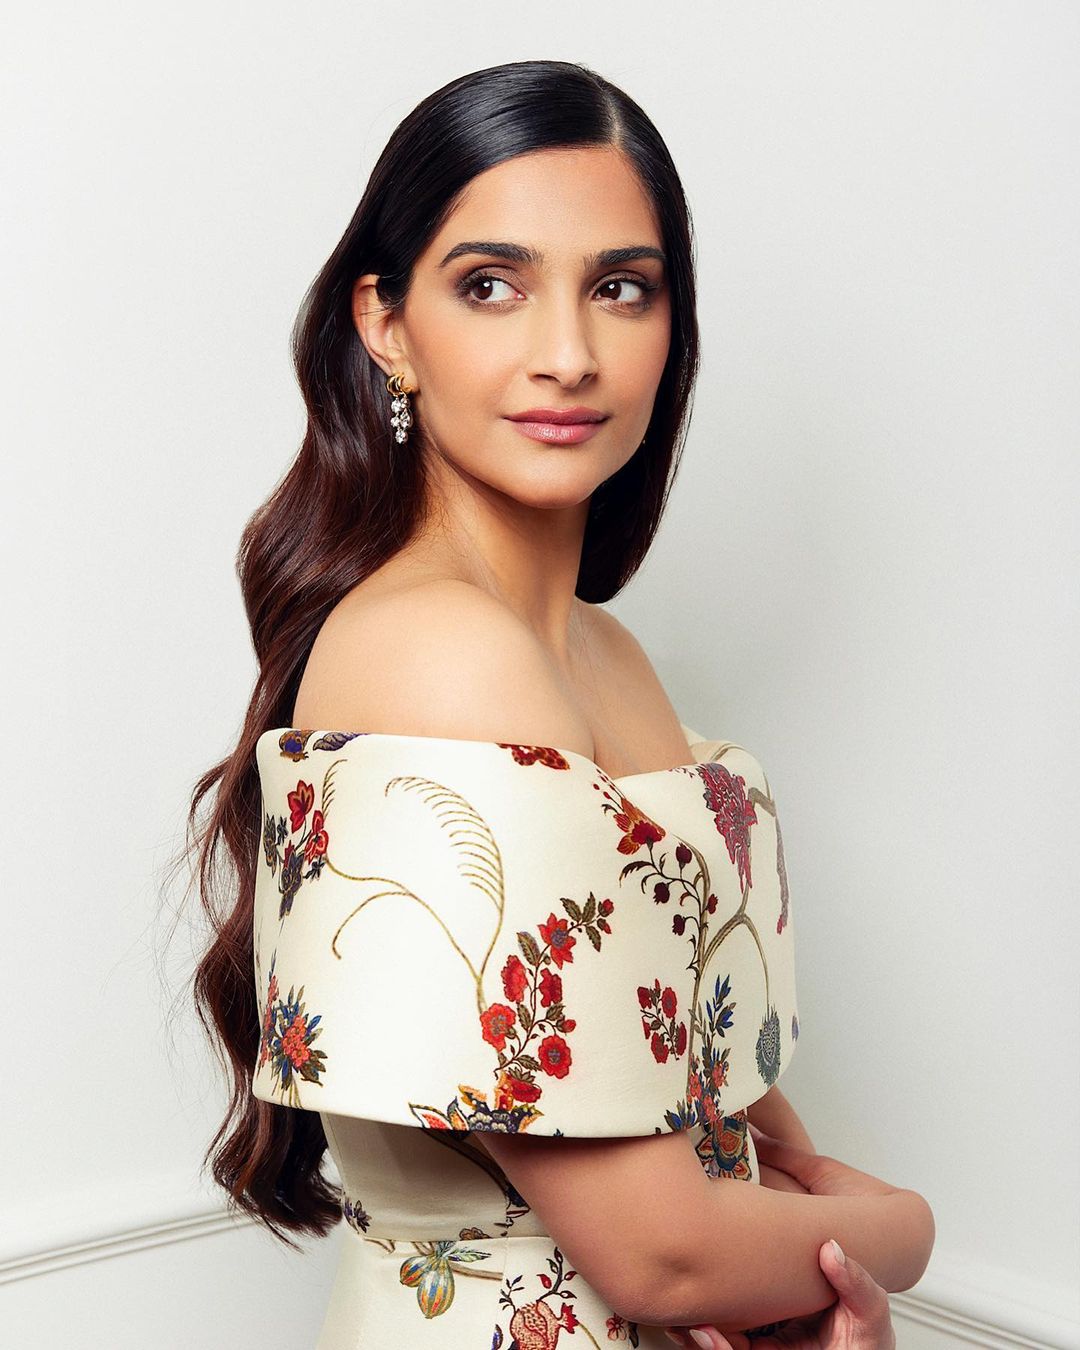 Sonam Kapoor reacts to fashion blogger teaching the netizens the meaning of her dress for Coronation Concert